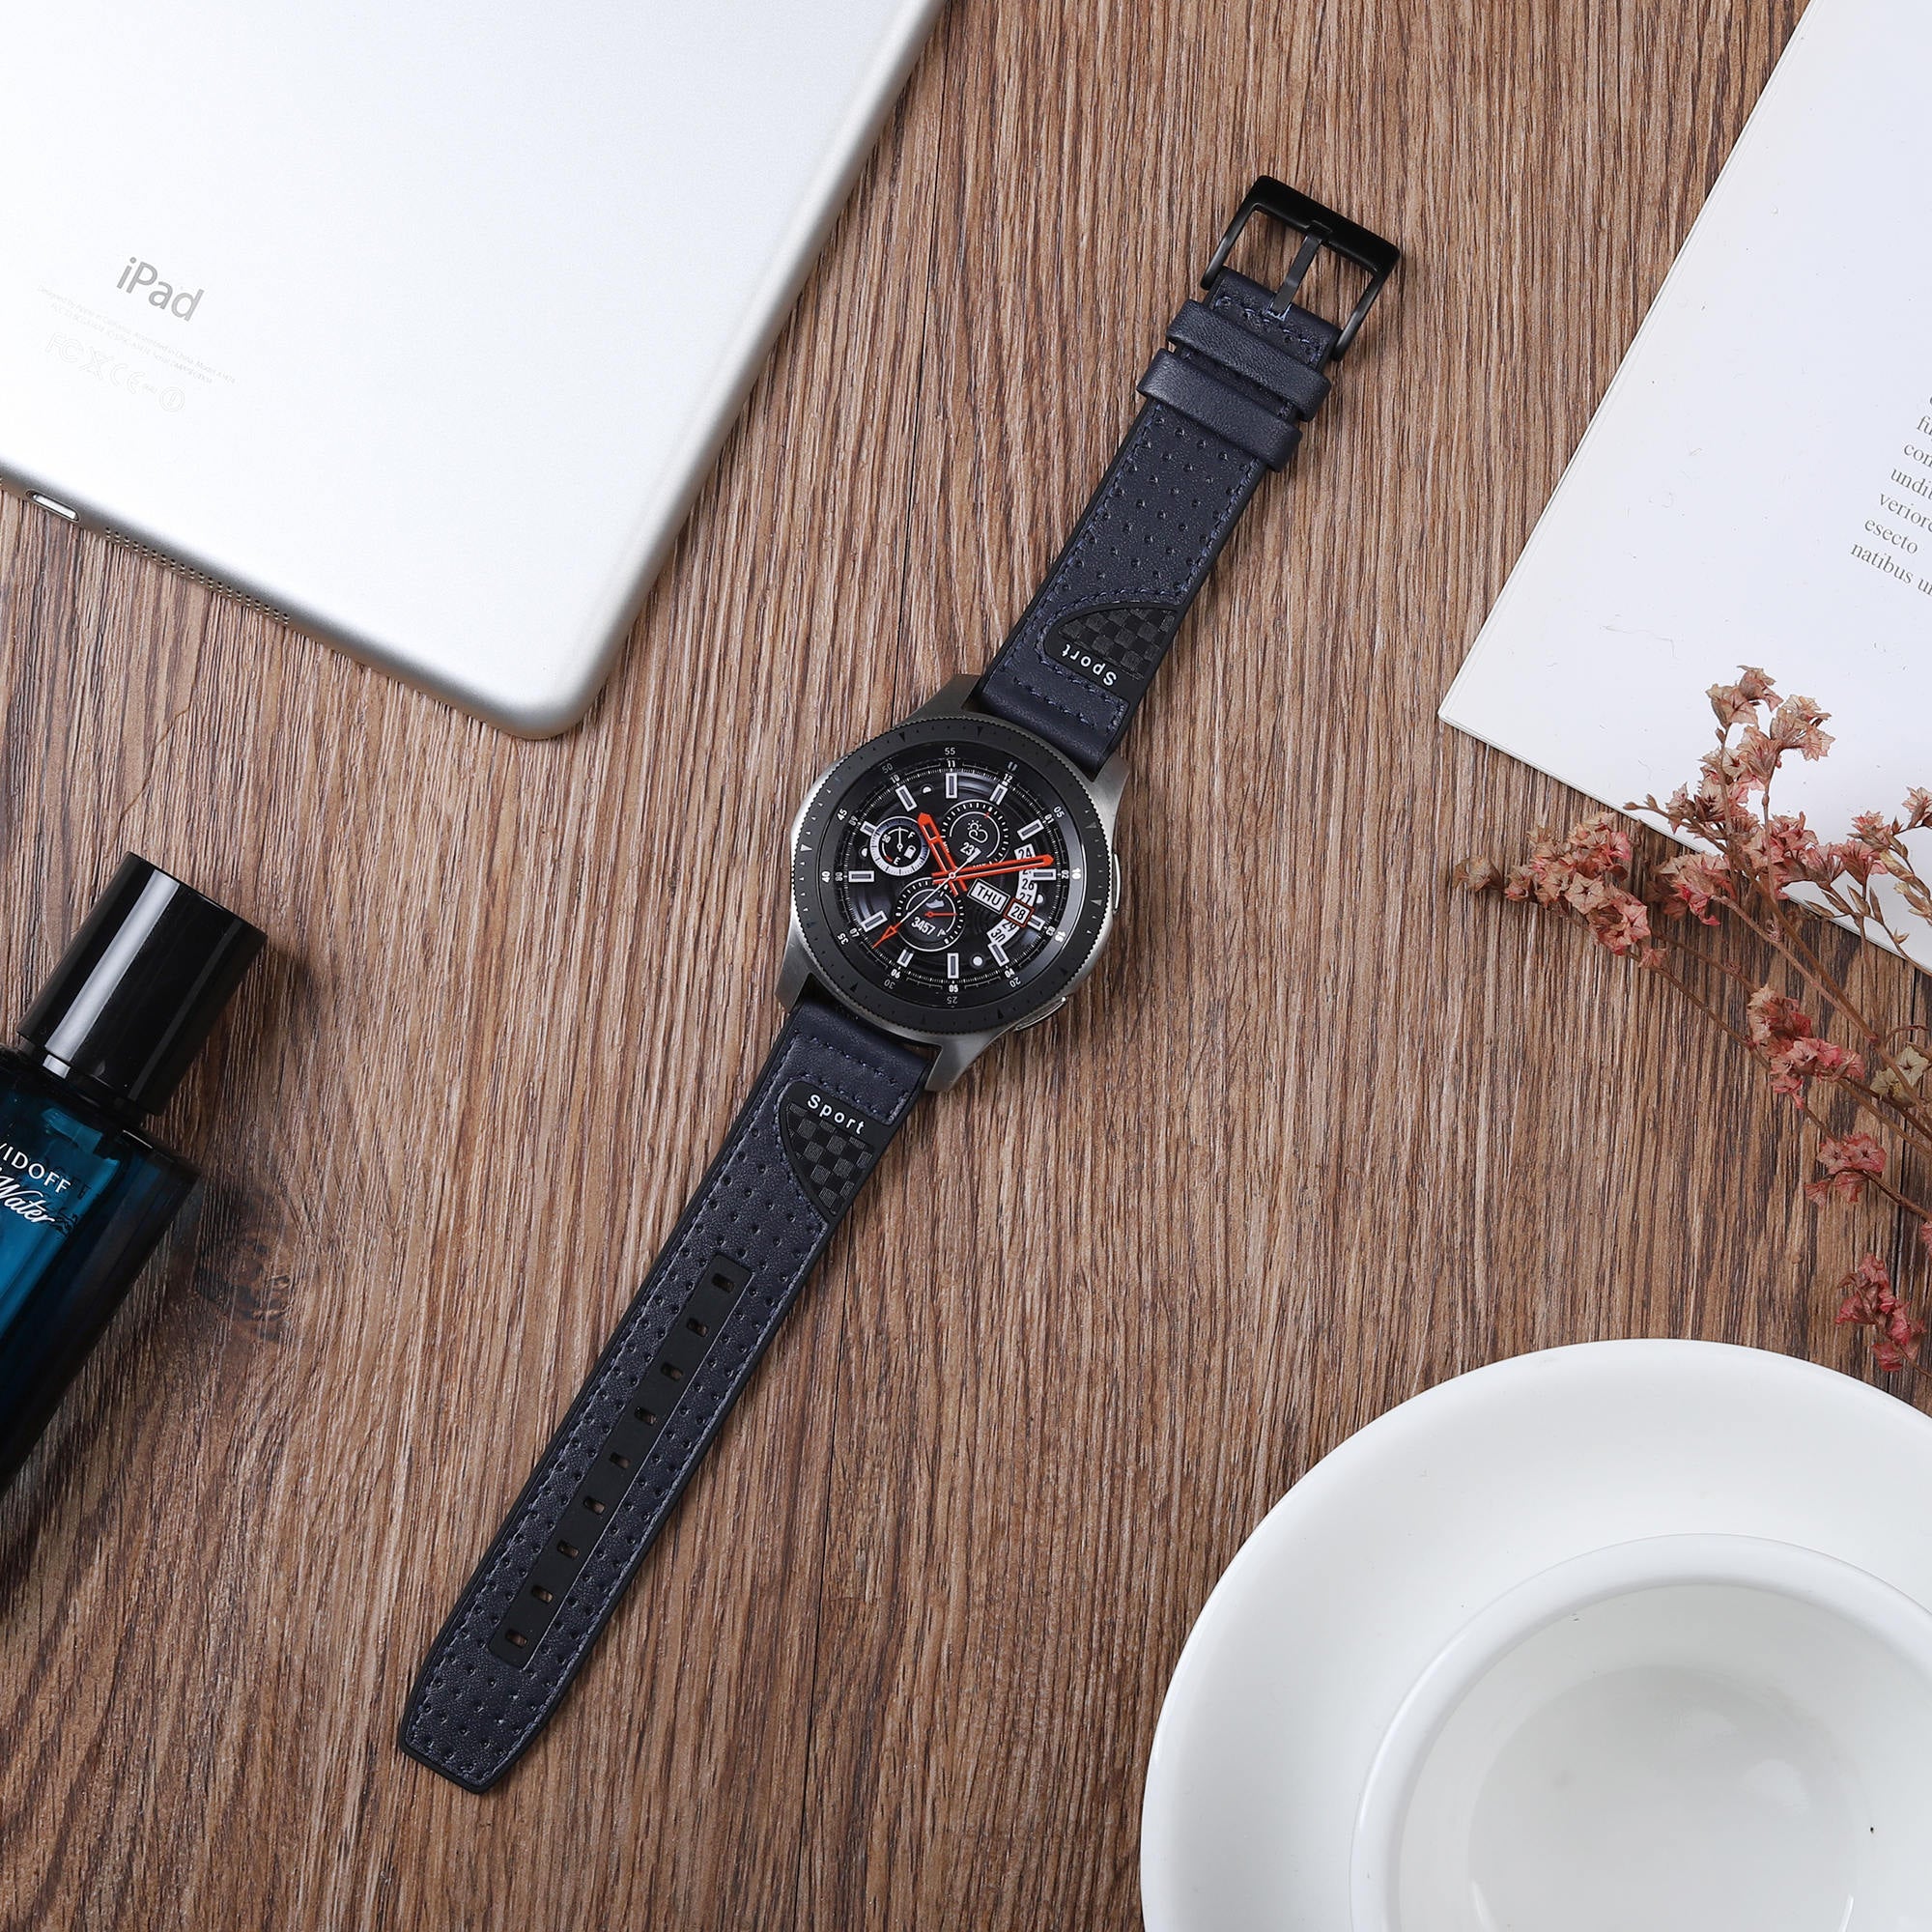 22mm Carbon Fiber Leather Coated Silicone Watch Strap for Huawei Watch GT2/Galaxy Watch 46mm etc. - Dark Blue